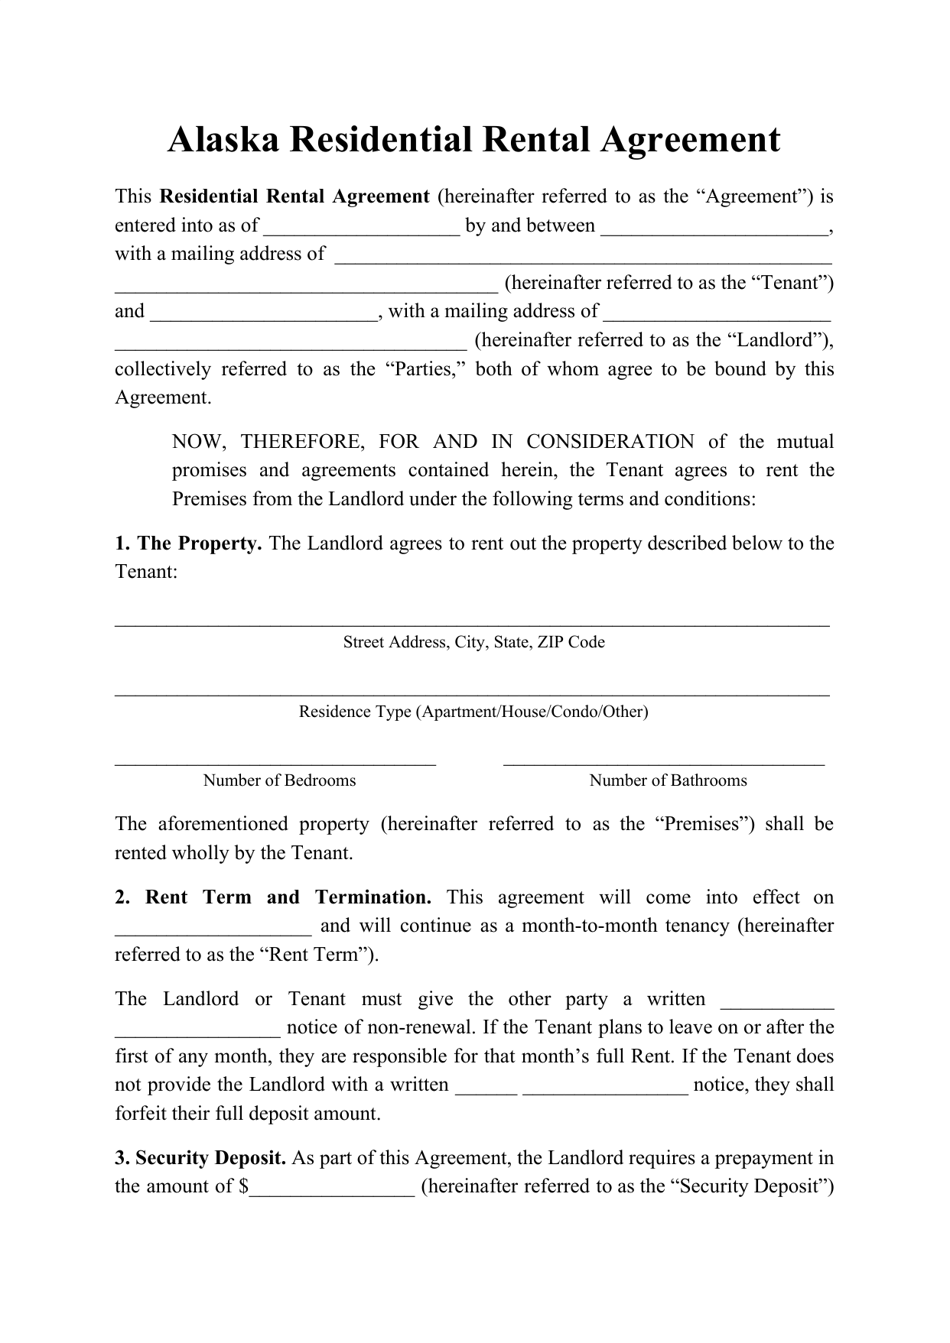 Residential Rental Agreement Template - Alaska, Page 1